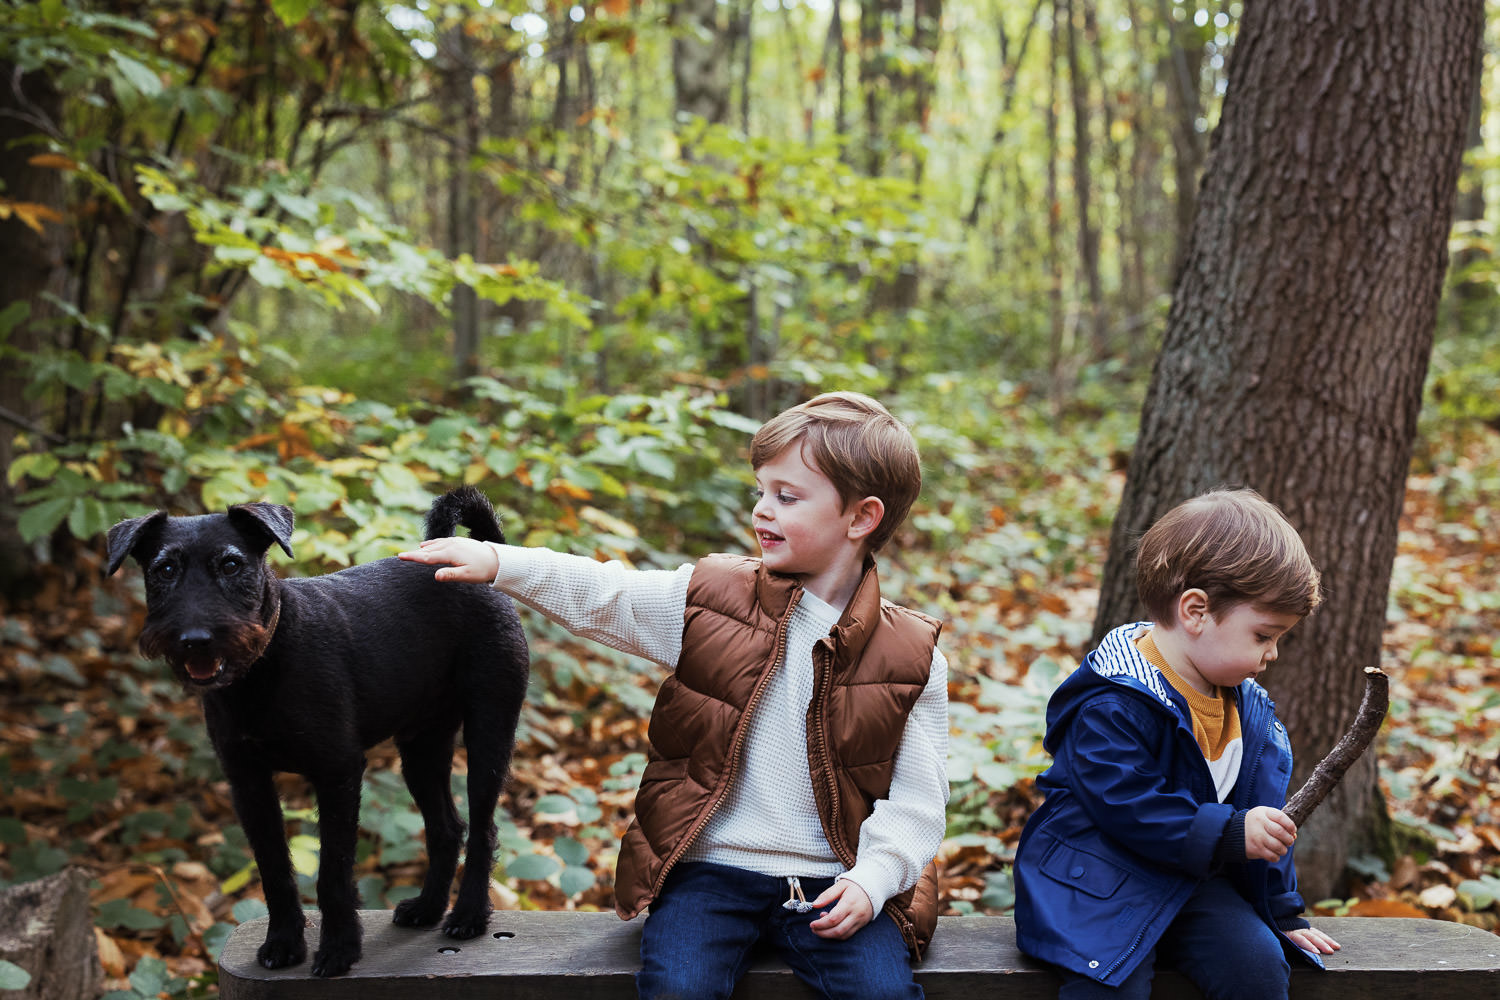 A photograph of two boys in the woods with their dog.
A family photography shoot in Hockley Woods.